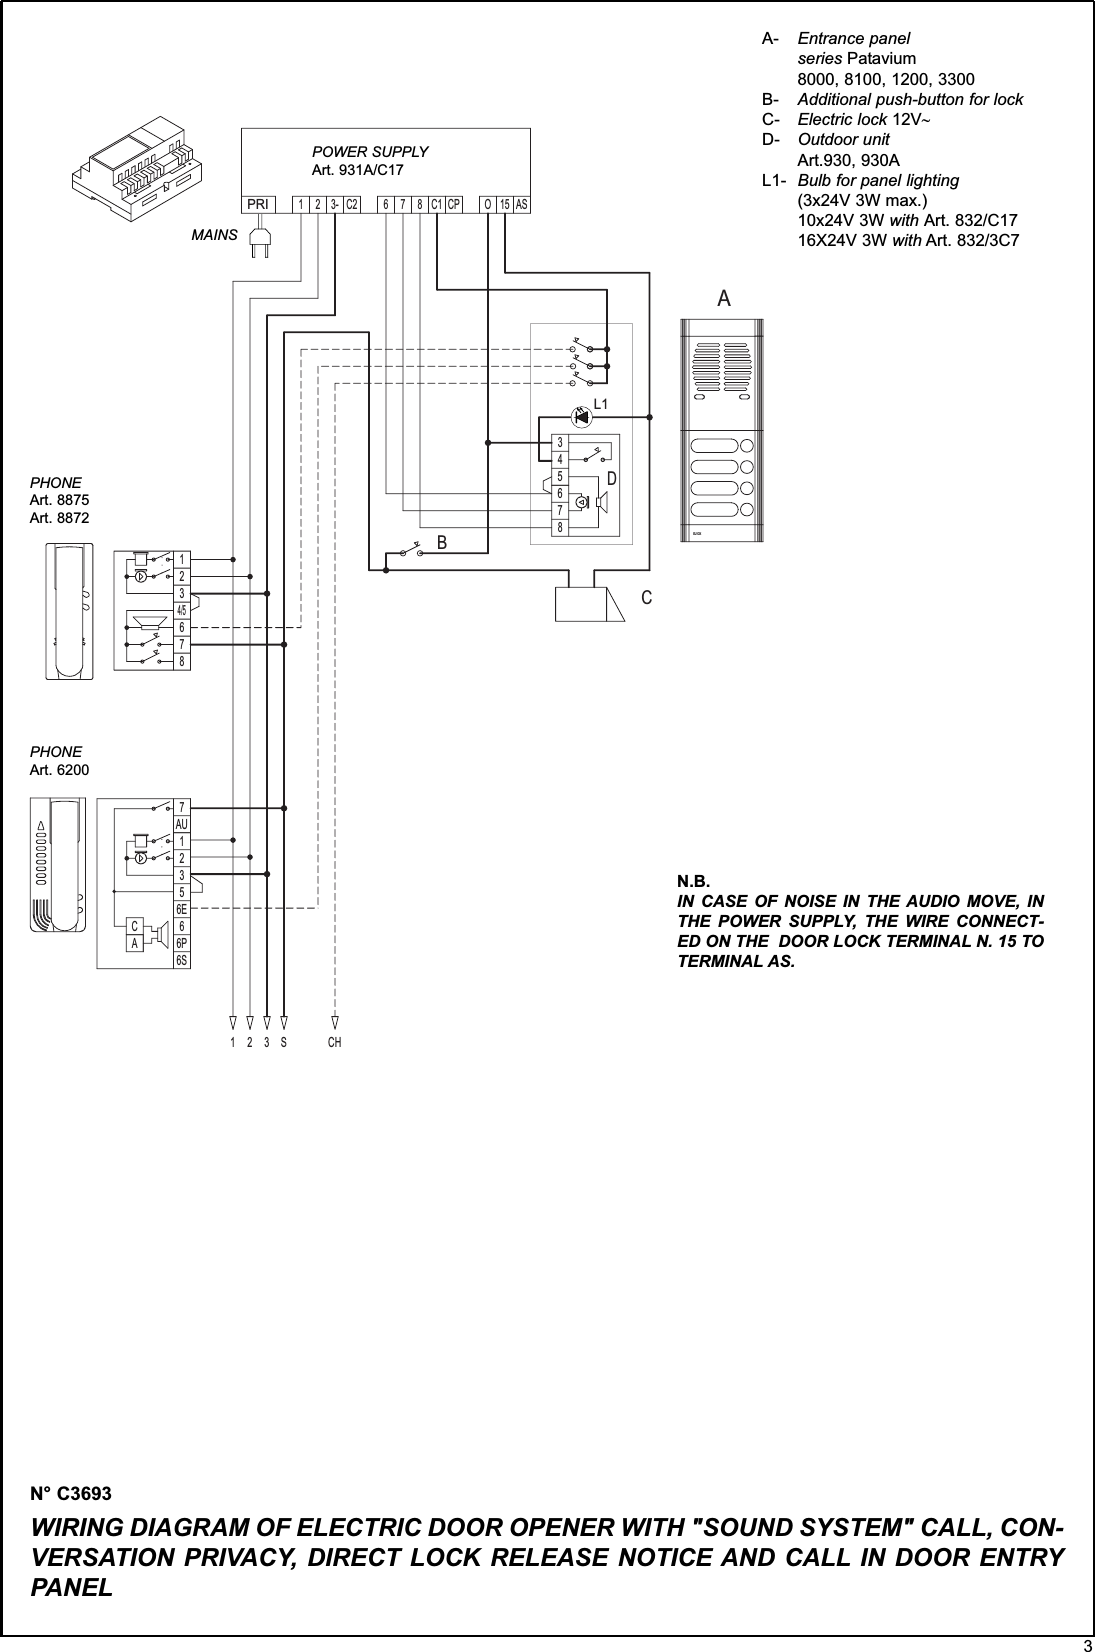 Page 3 of 8 - 931 Wiring Diagram